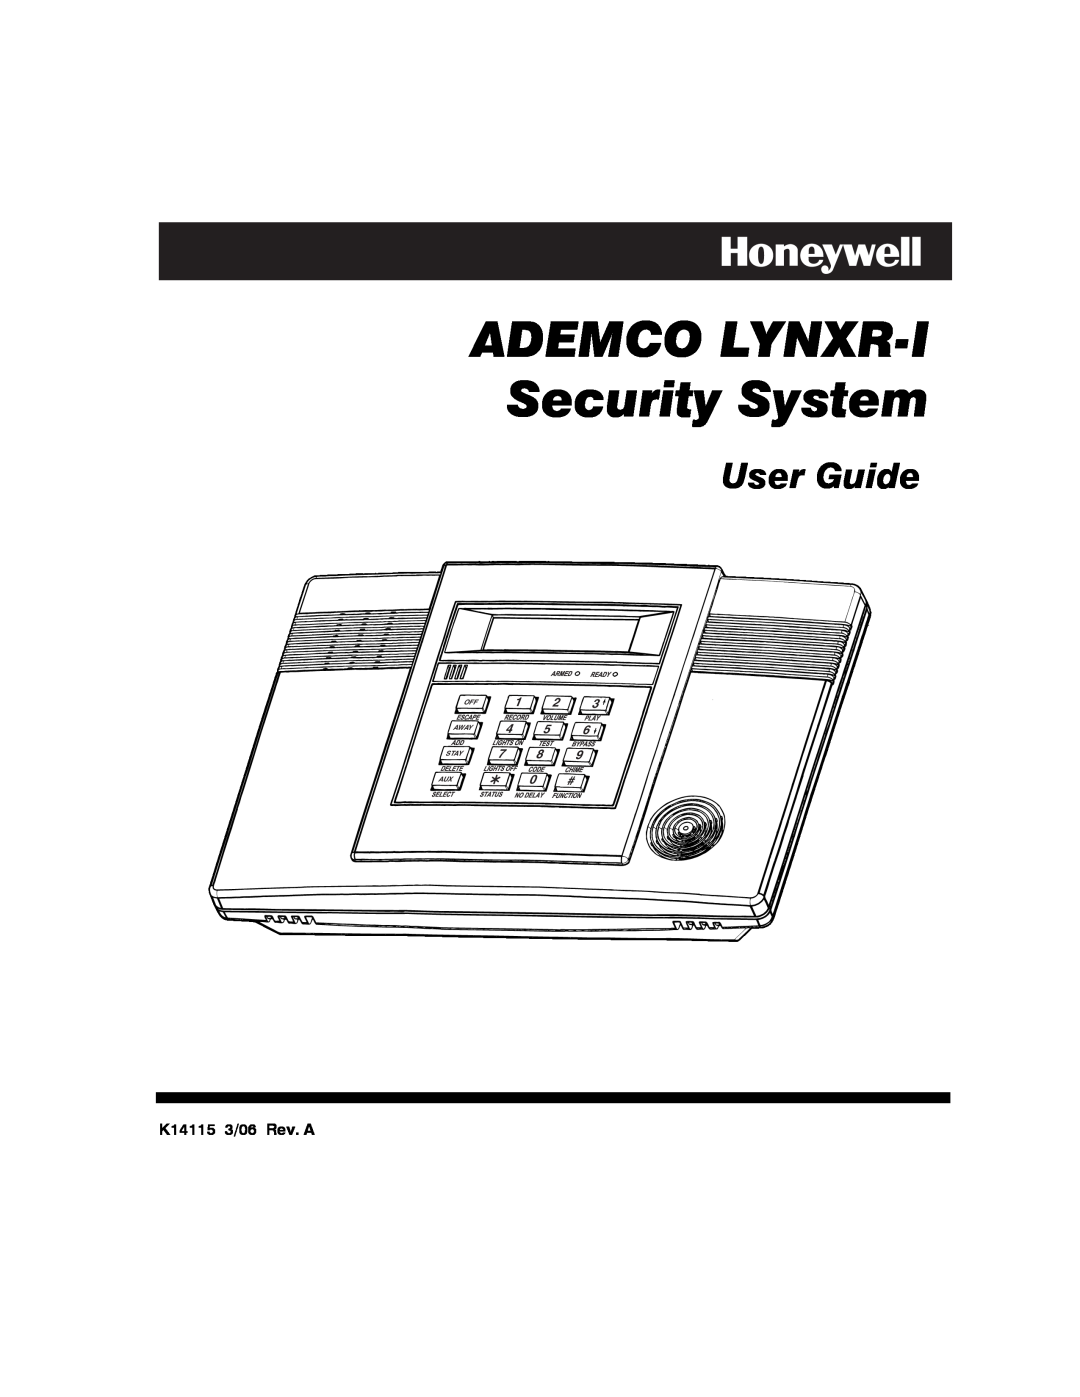 Honeywell manual User Guide, K14115 3/06 Rev. A, ADEMCO LYNXR-I Security System, PLAY3, Armed, Selectaux, Ready 